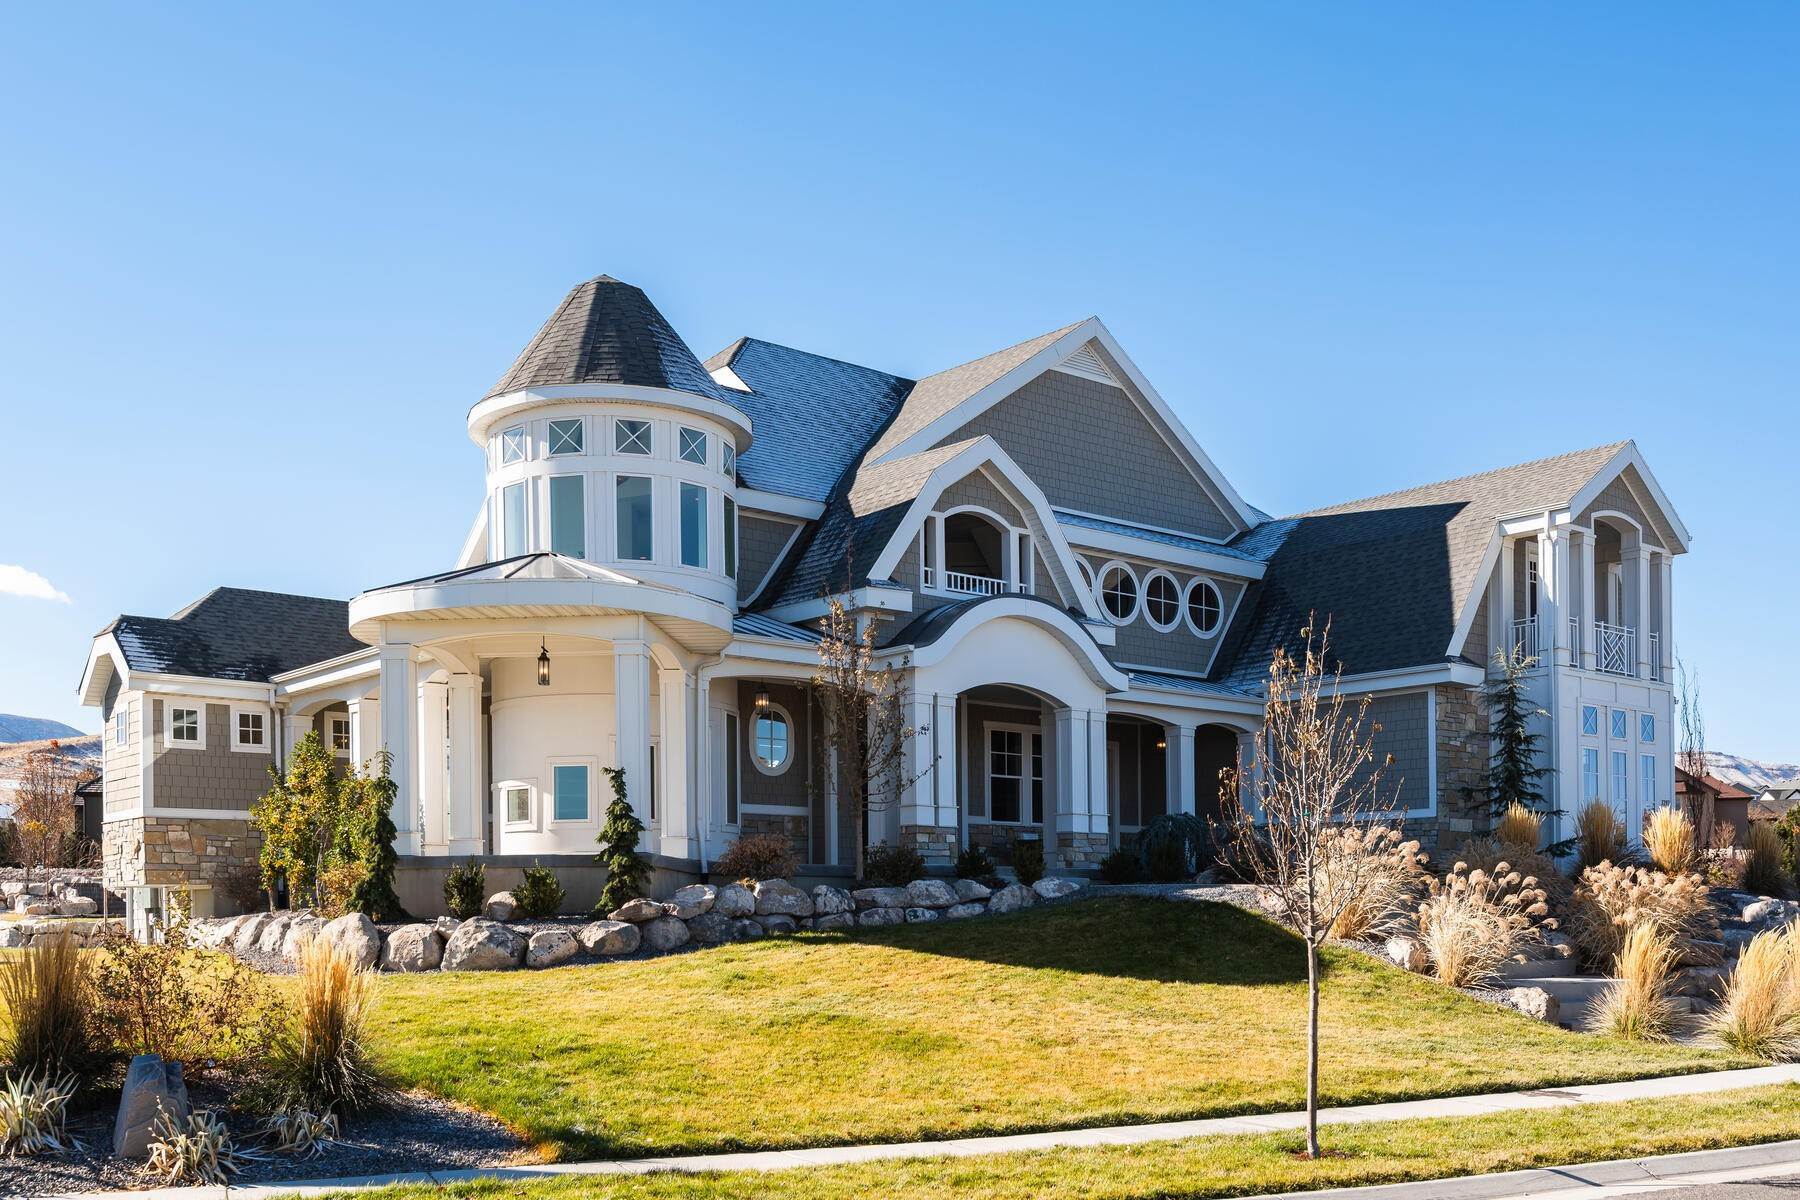 Single Family Homes for Sale at Brand New Hamptons 3297 W Blue Springs Ln Bluffdale, Utah 84065 United States